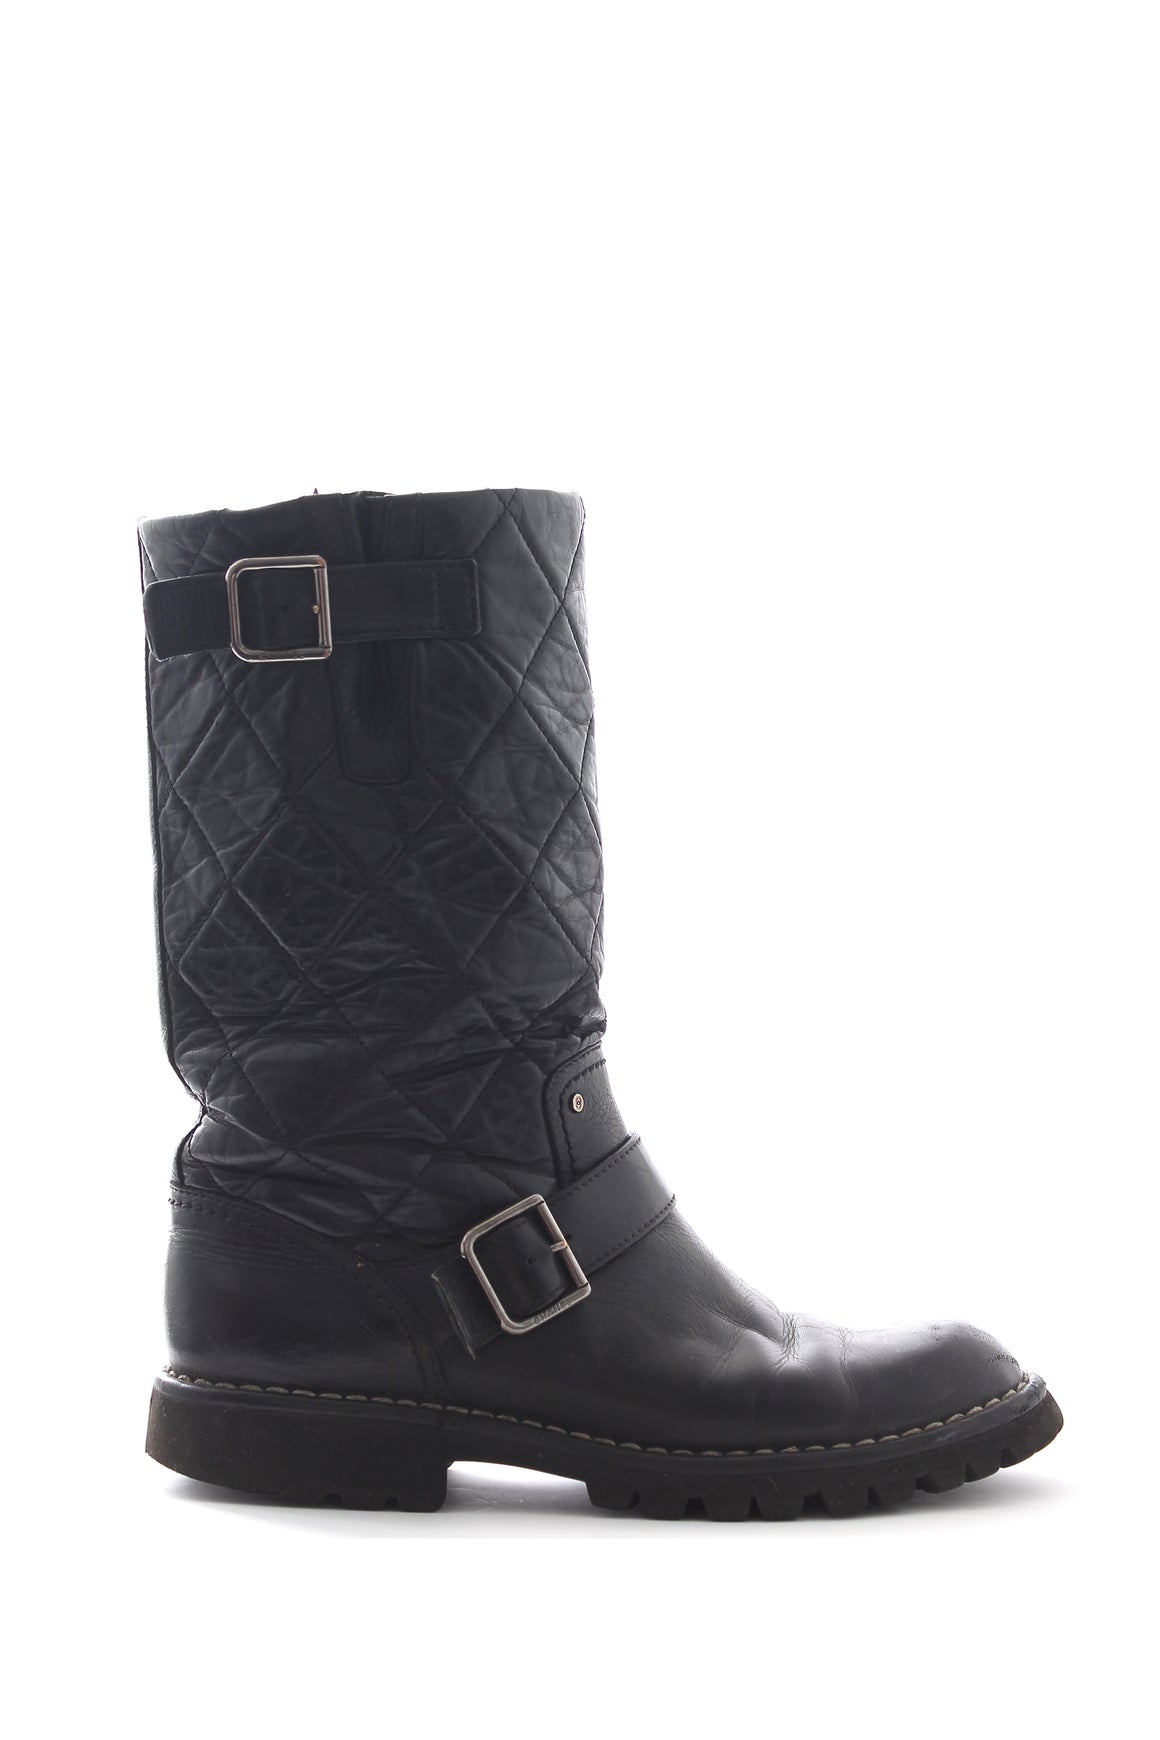 Chanel Buckled Quilted Leather Biker Boots